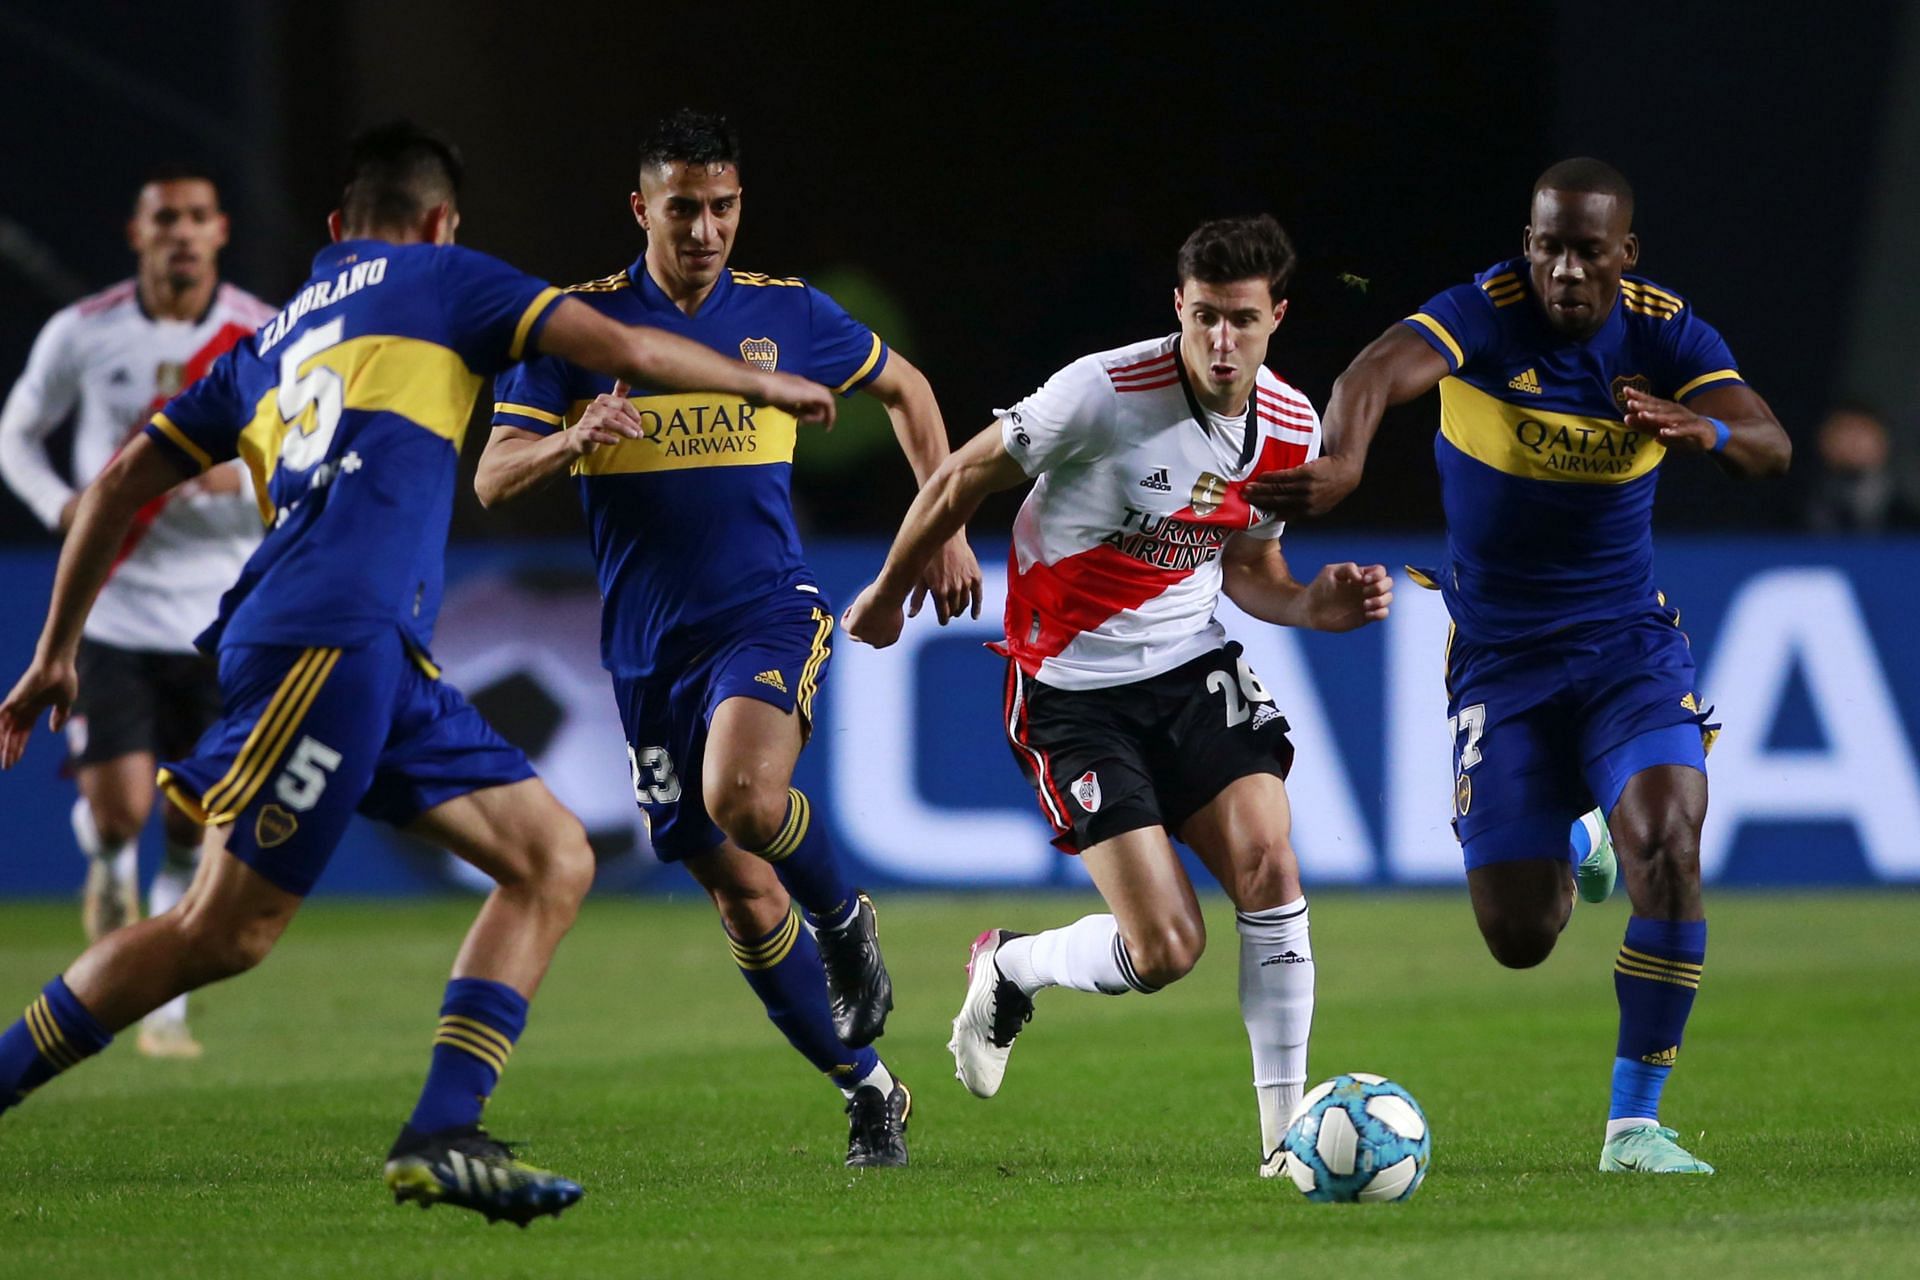 River Plate host Boca Juniors in their upcoming Argentine Primera Division fixture on Sunday